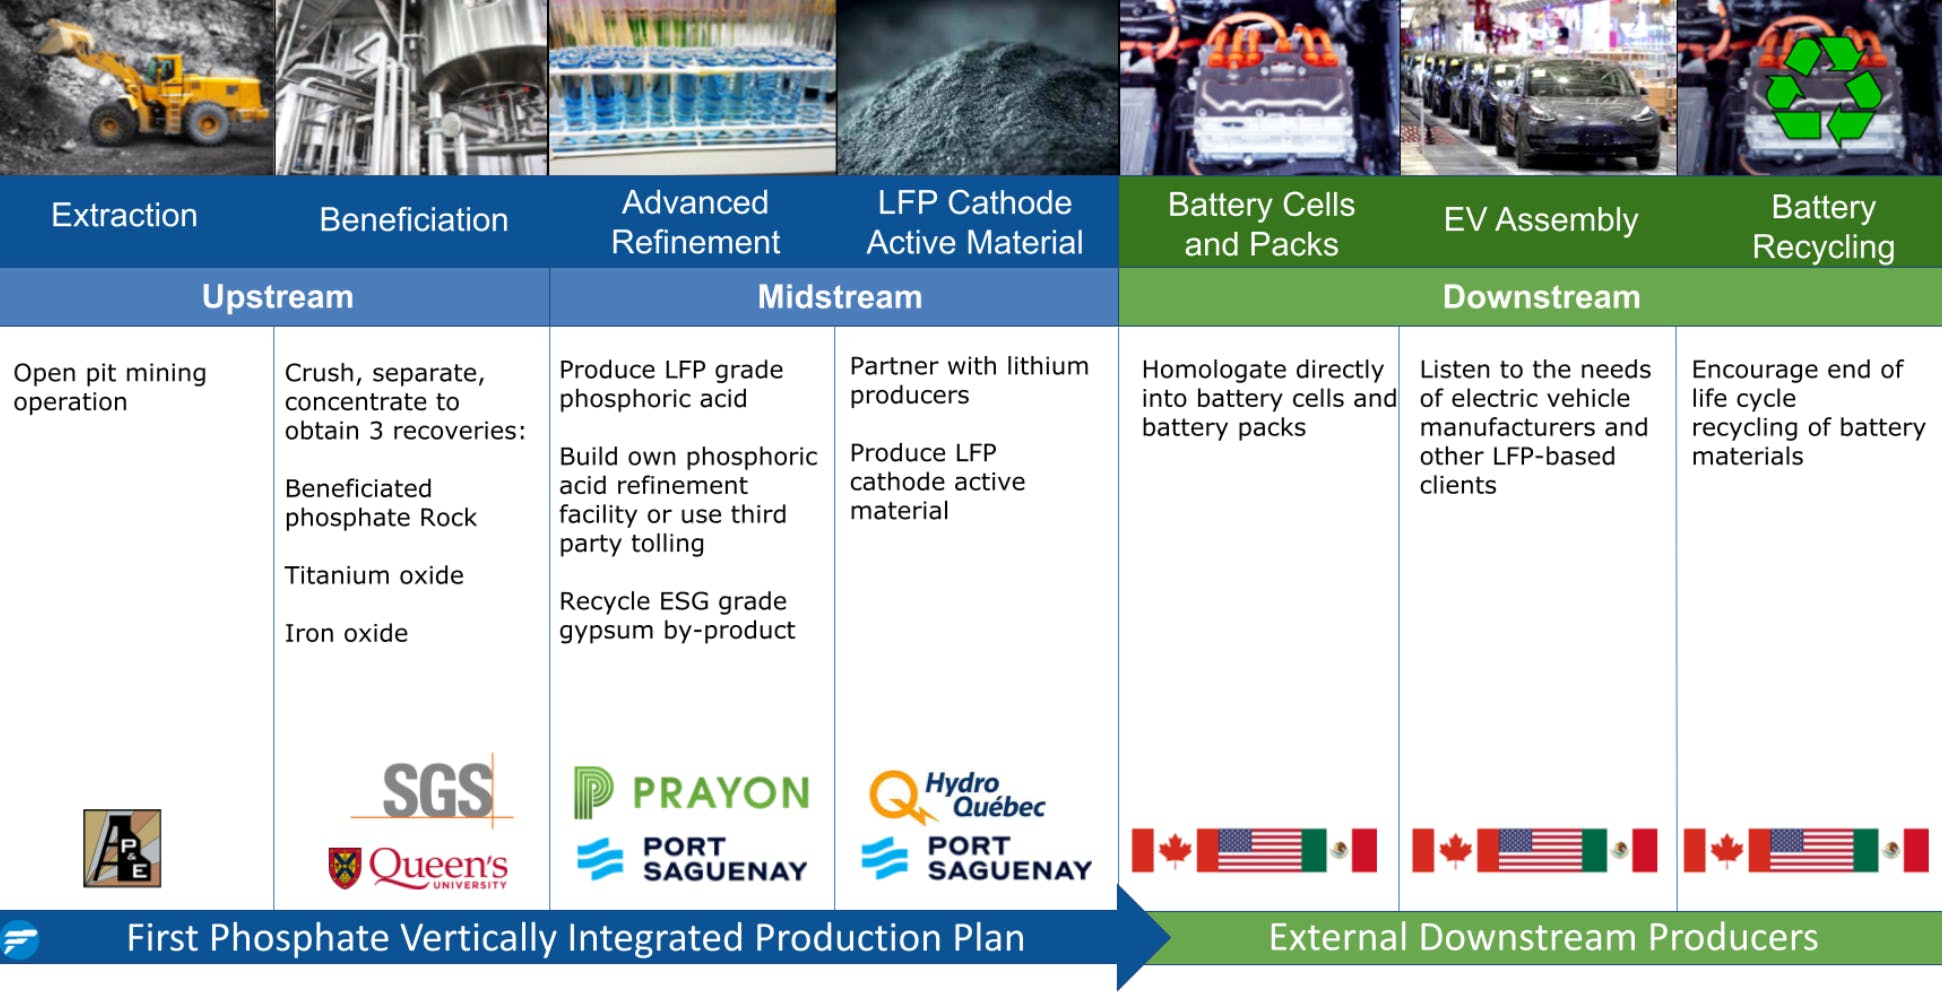 First Phosphate Vertically Integrated Production Plan | First Phosphate